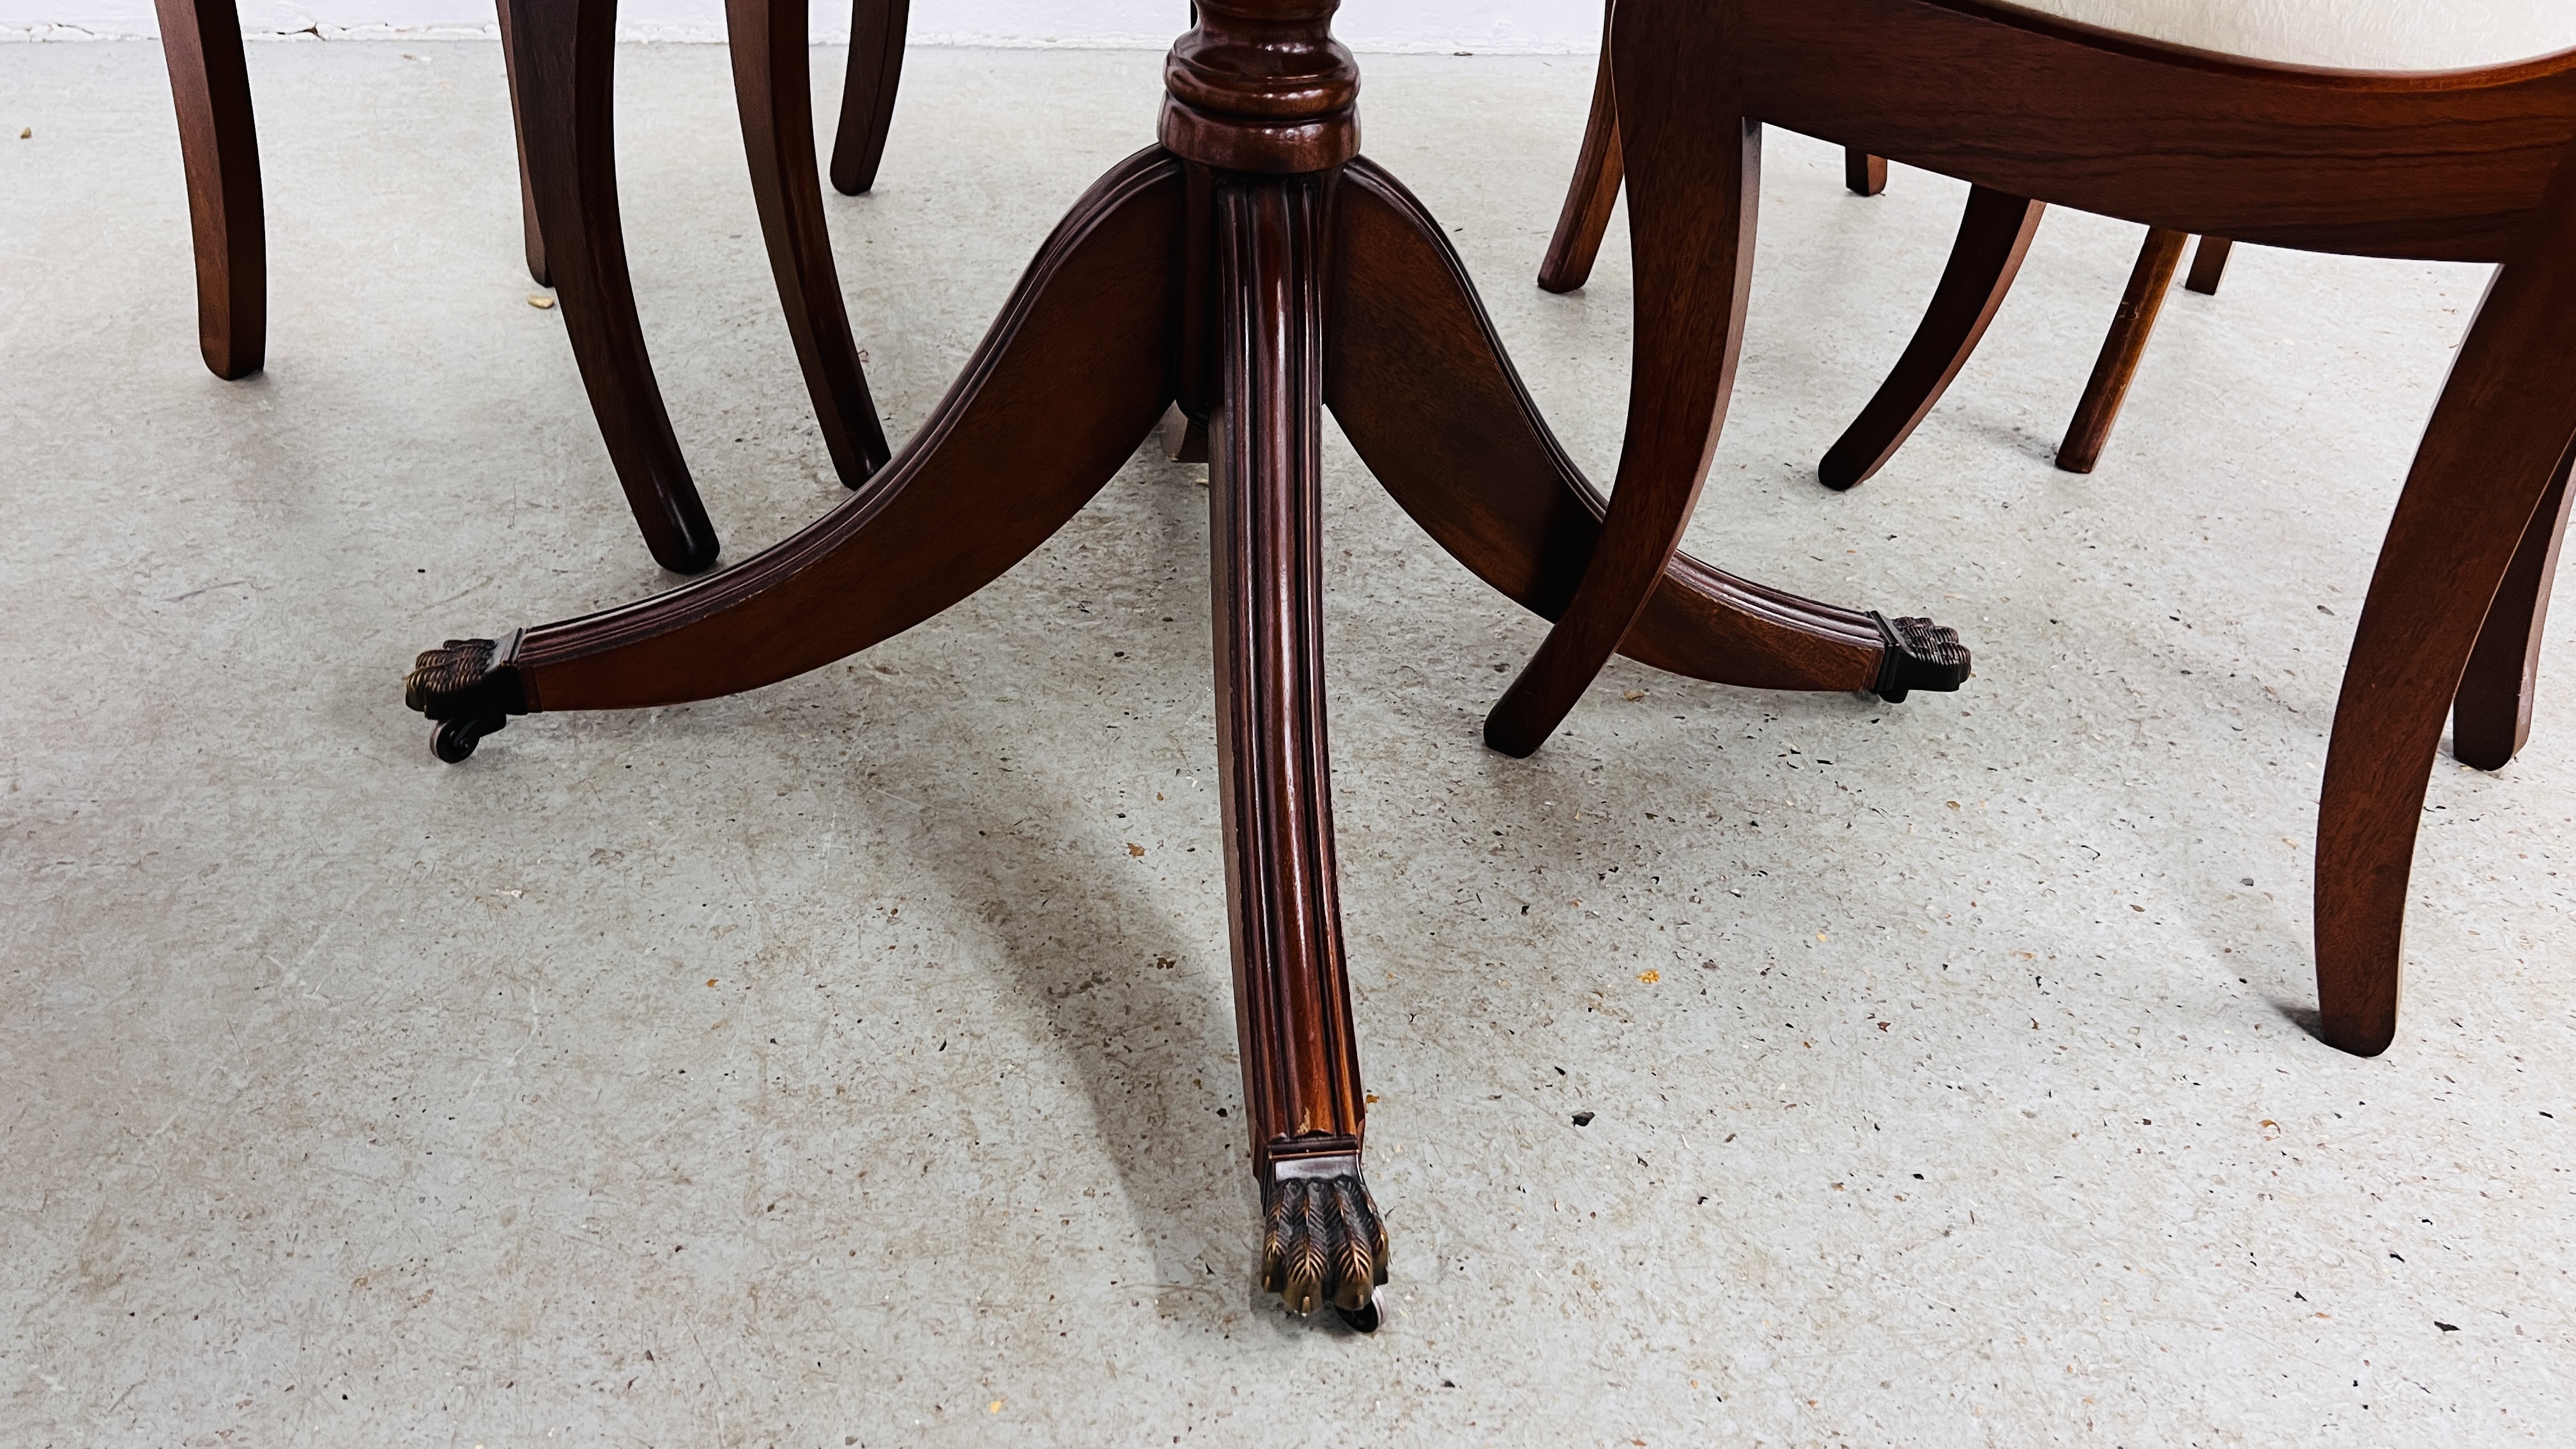 A REPRODUCTION MAHOGANY FINISH EXTENDING DROP LEAF DINING TABLE ALONG WITH 4 MATCHING CHAIRS AND 2 - Image 6 of 8